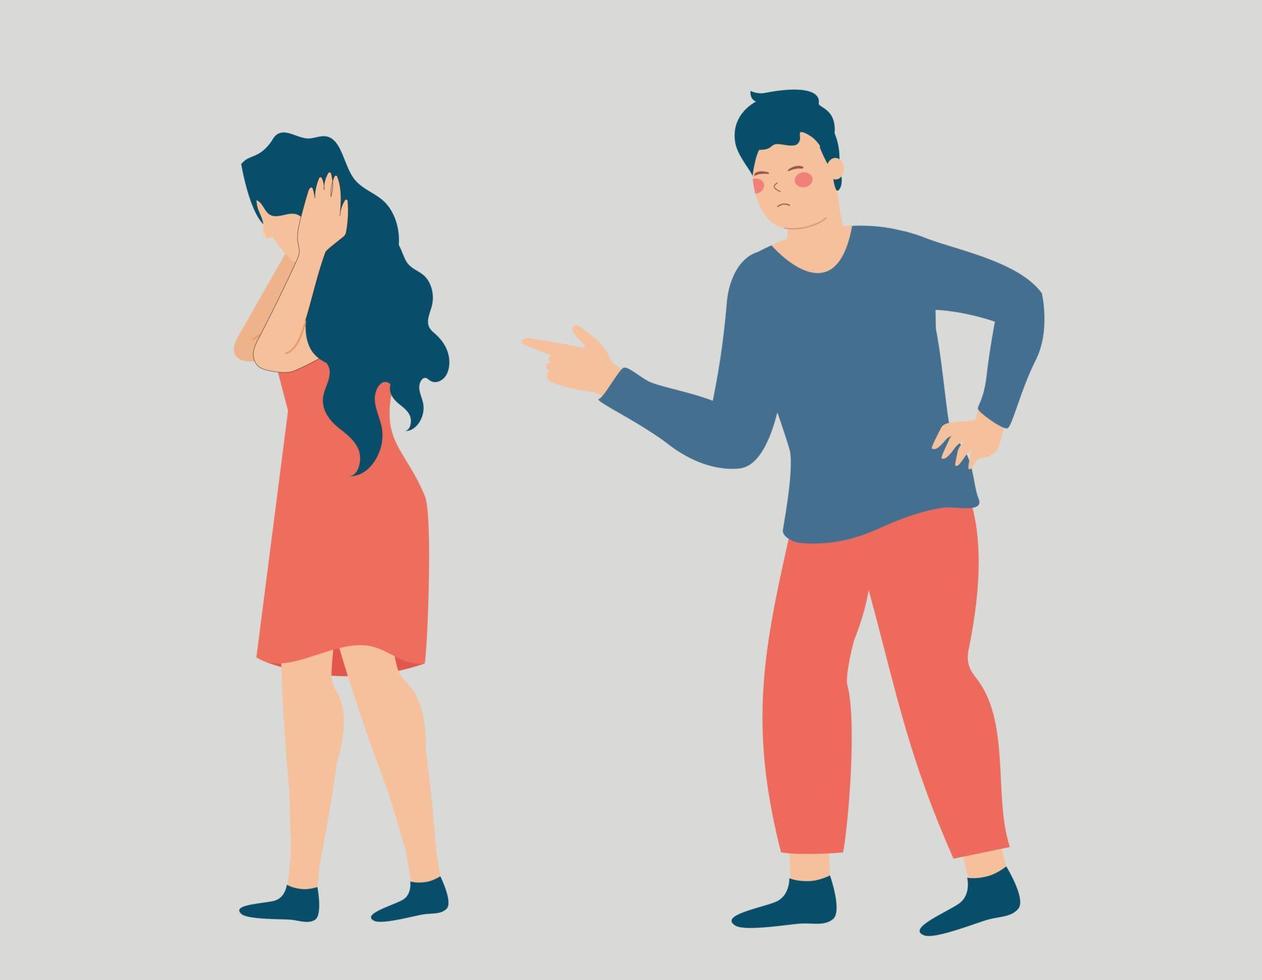 Man points his finger at a woman, criticizes and blames her. Female covers her ears due to accusations. Stop violence, bullying and abuse against women. Concept of verbal assault between couple. vector